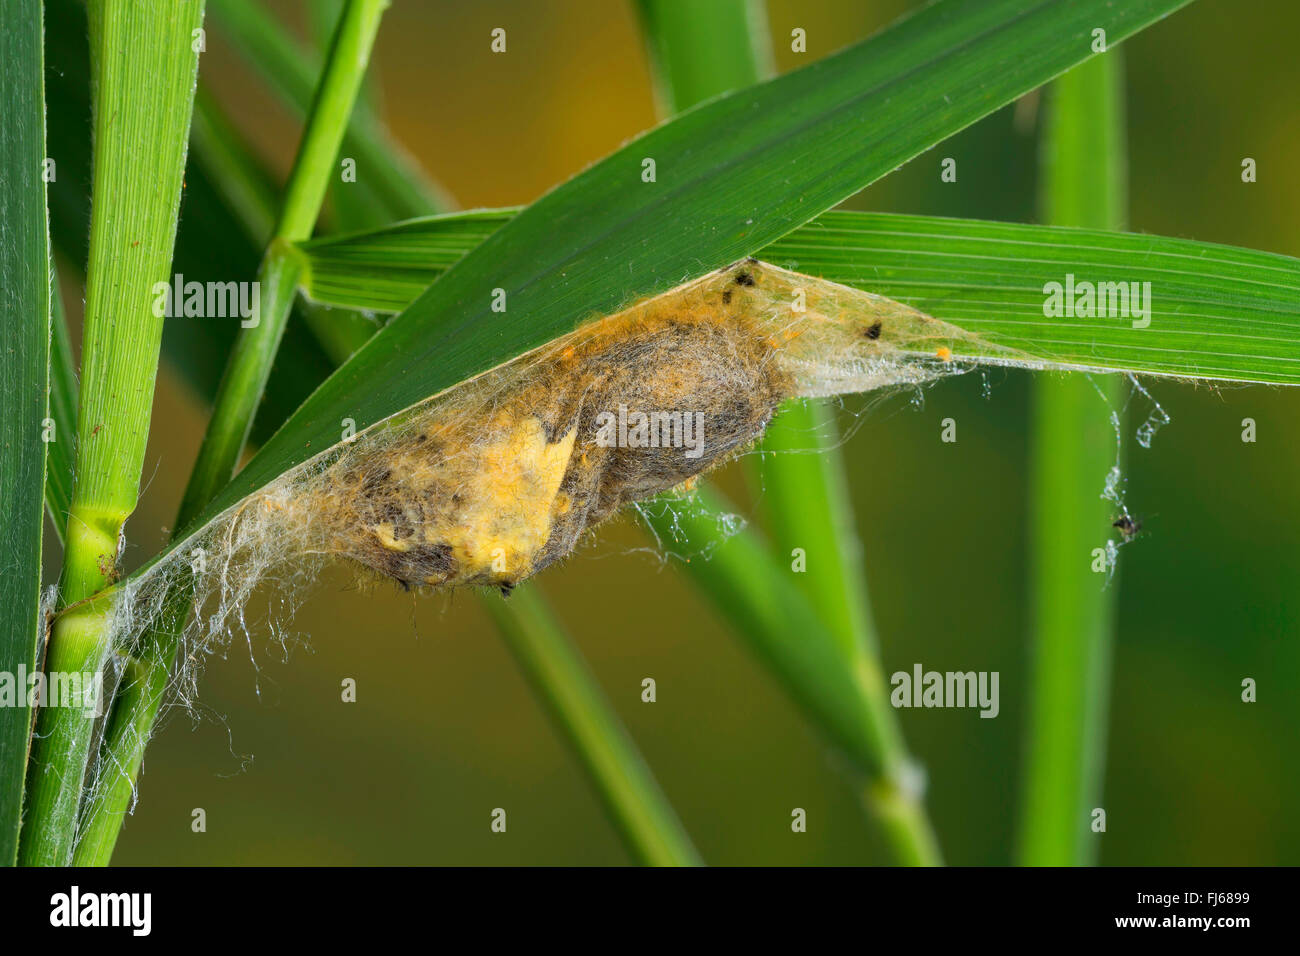 The Drinker (Philudoria potatoria, Euthrix potatoria), pupa in a cocoon at a blade of grass, Germany Stock Photo